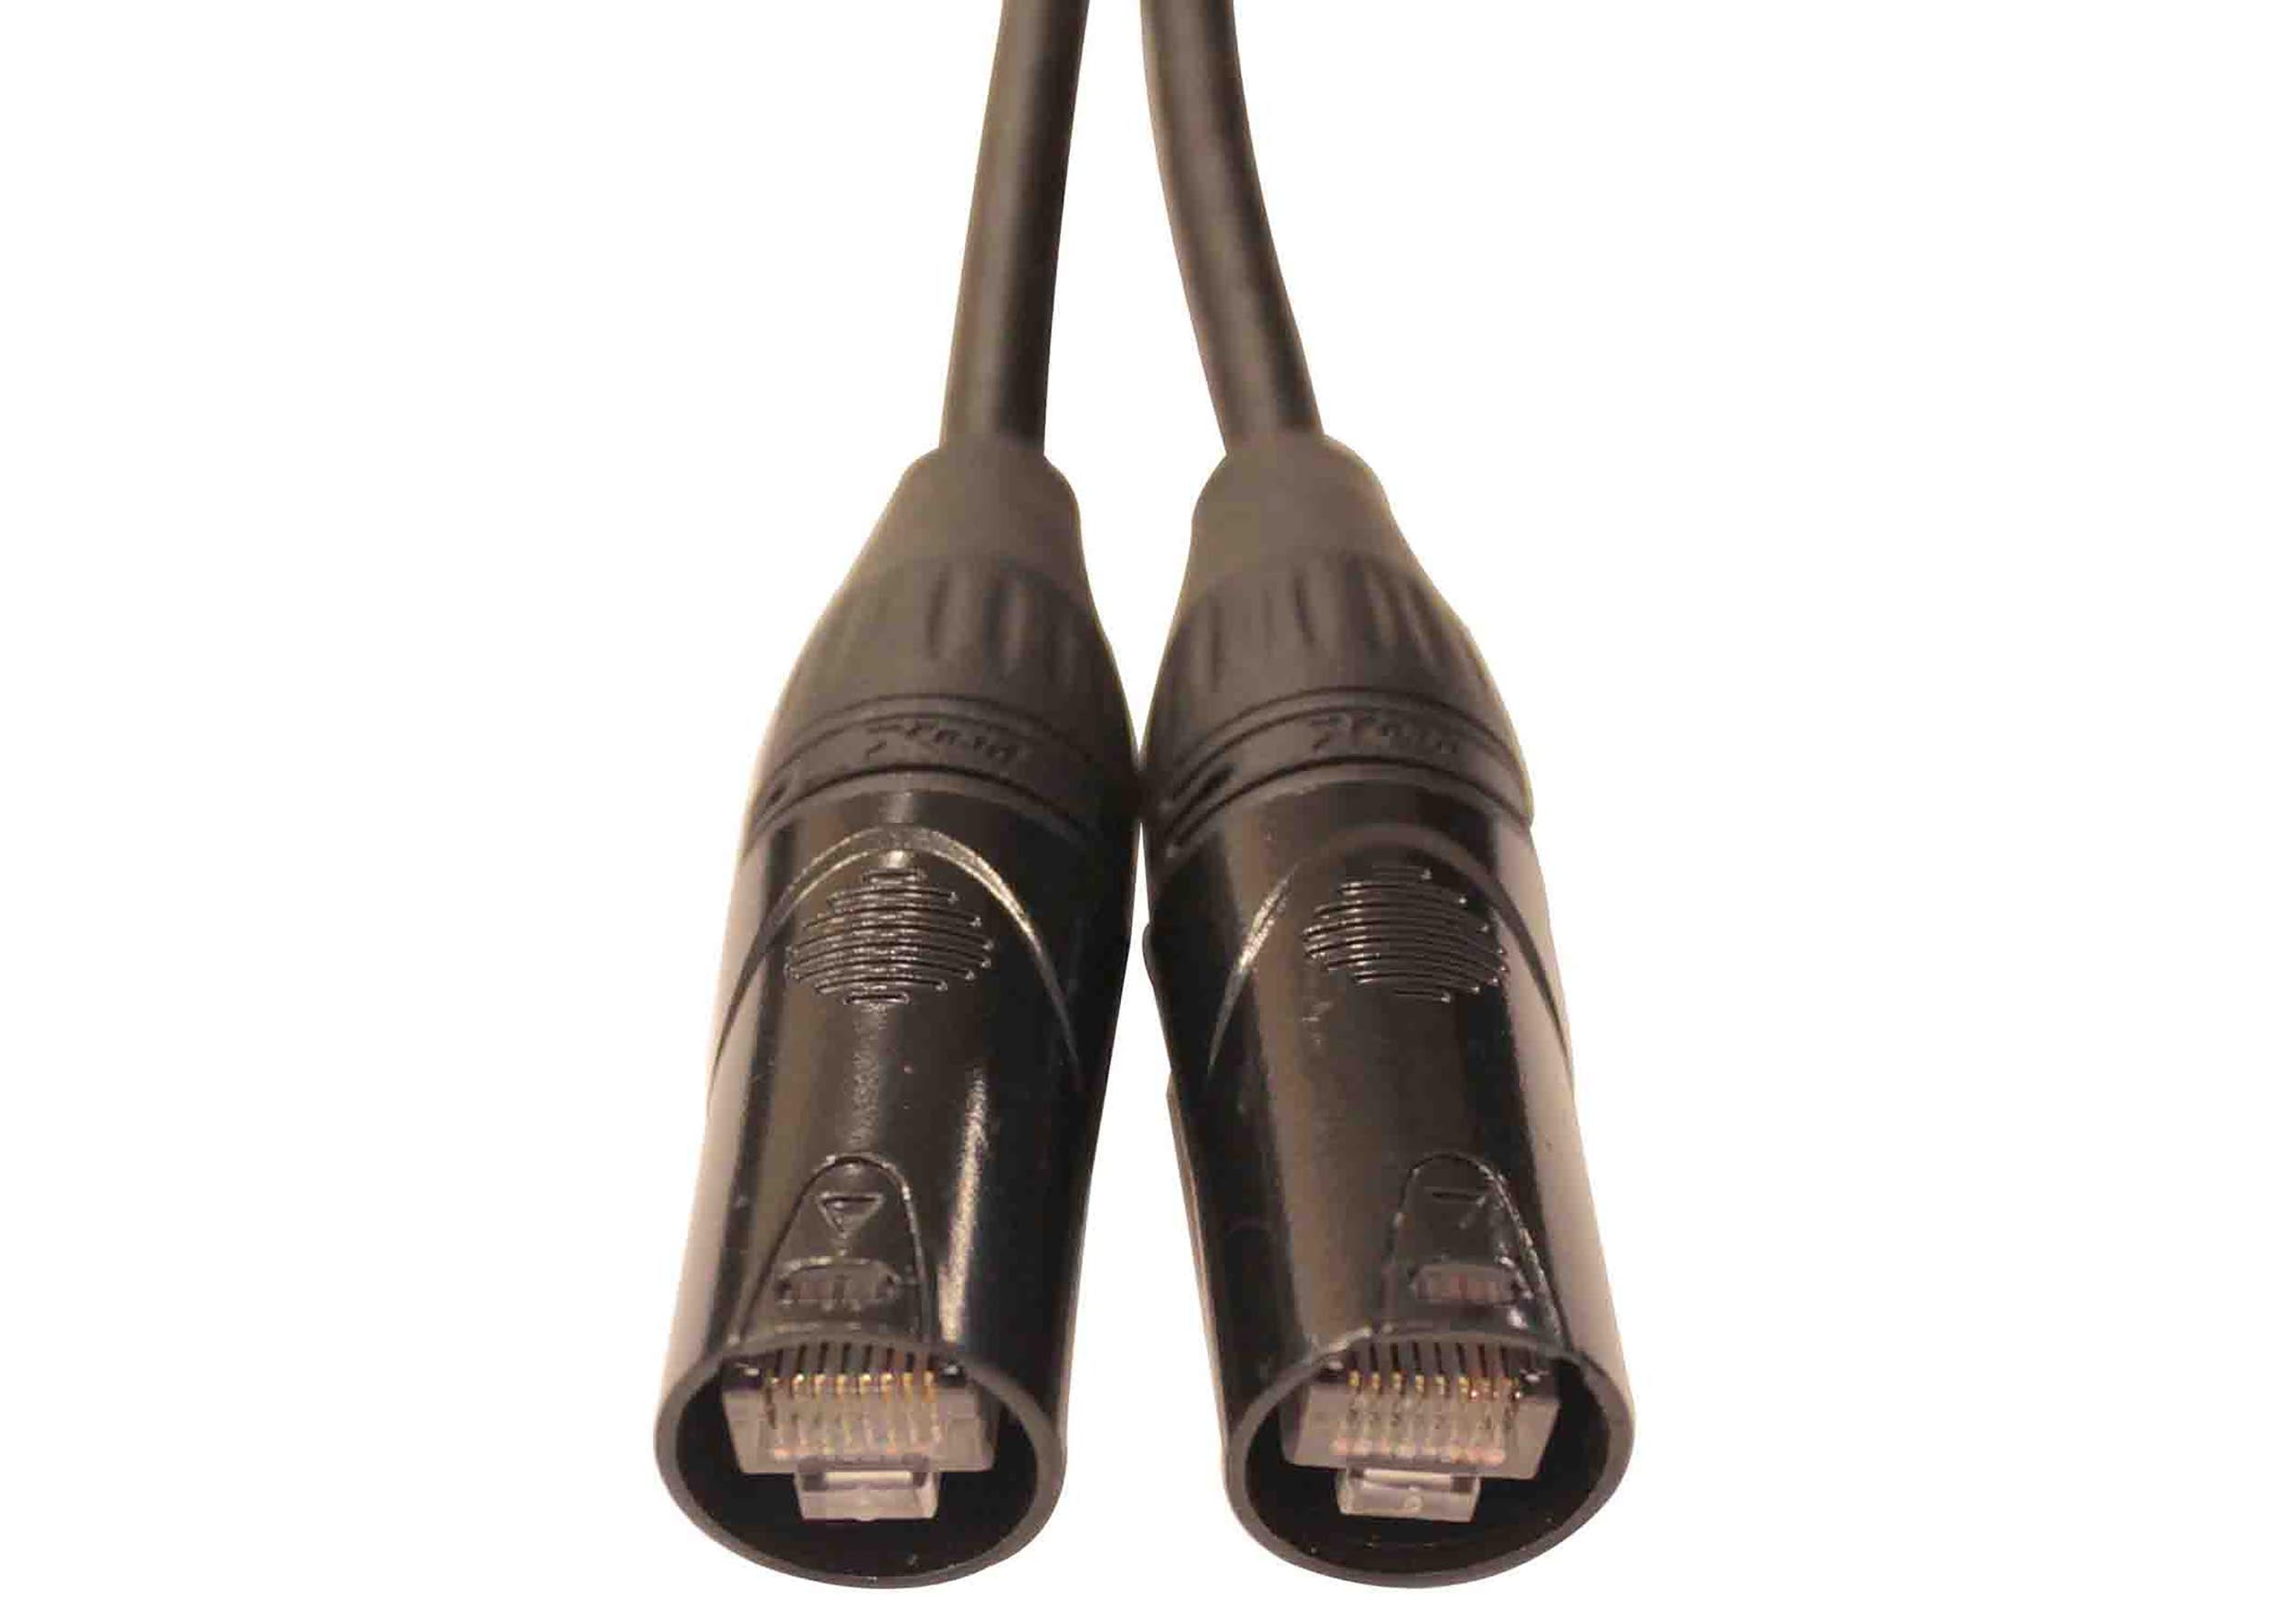 Prox XC-CAT6-75 STP Cat 6 Cable W-RJ45 for Network and Snake Box Connections - 75 Feet by ProX Cases